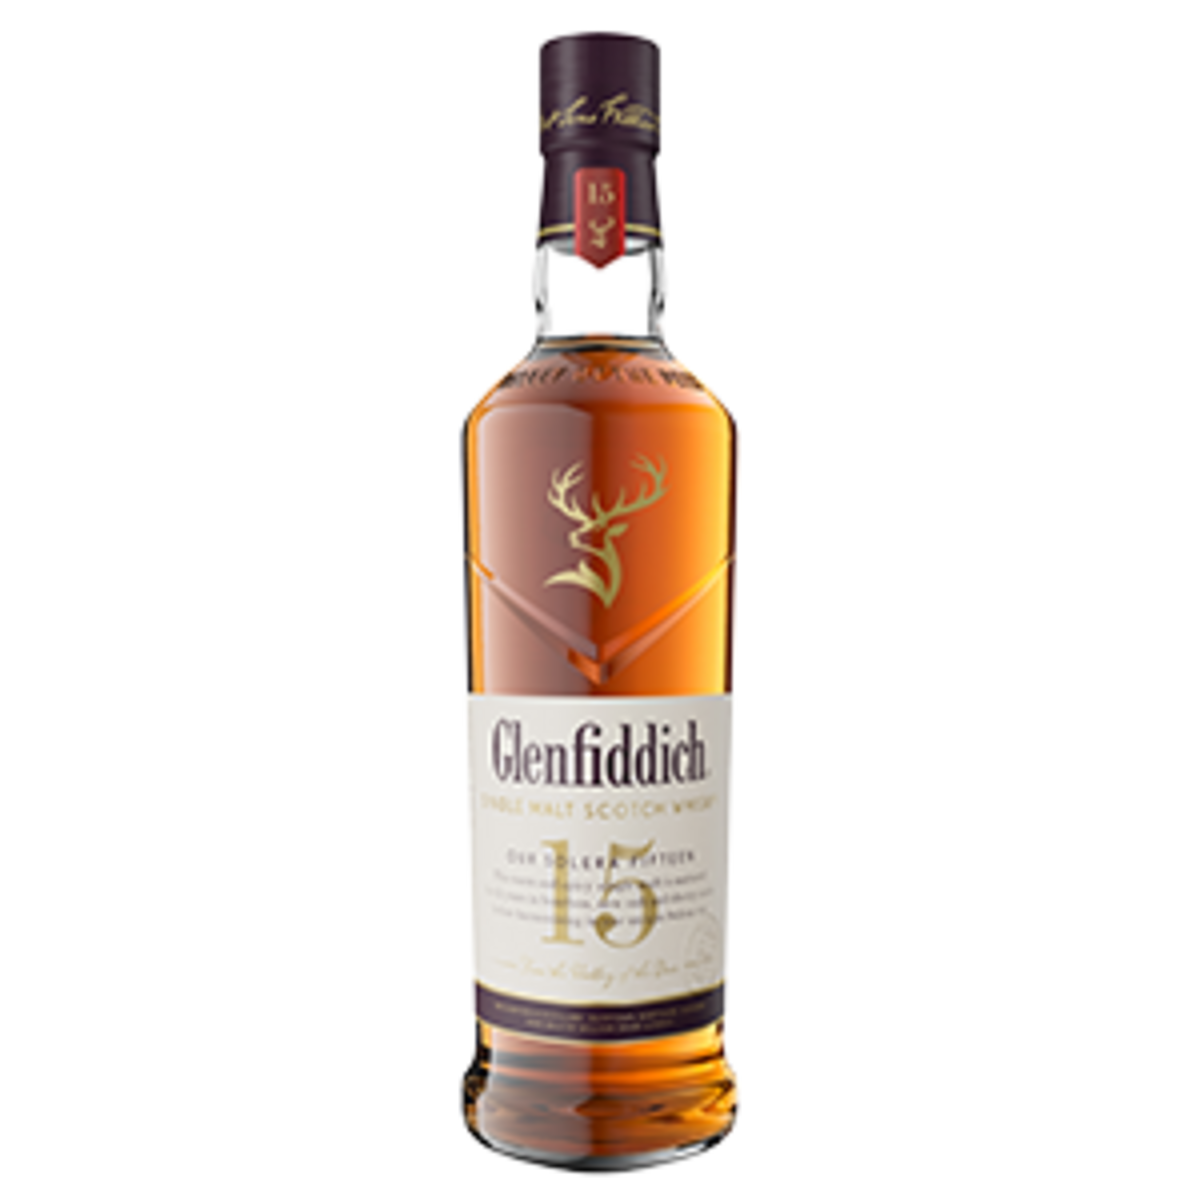 Glenfiddich 15 year old Our Solera Review